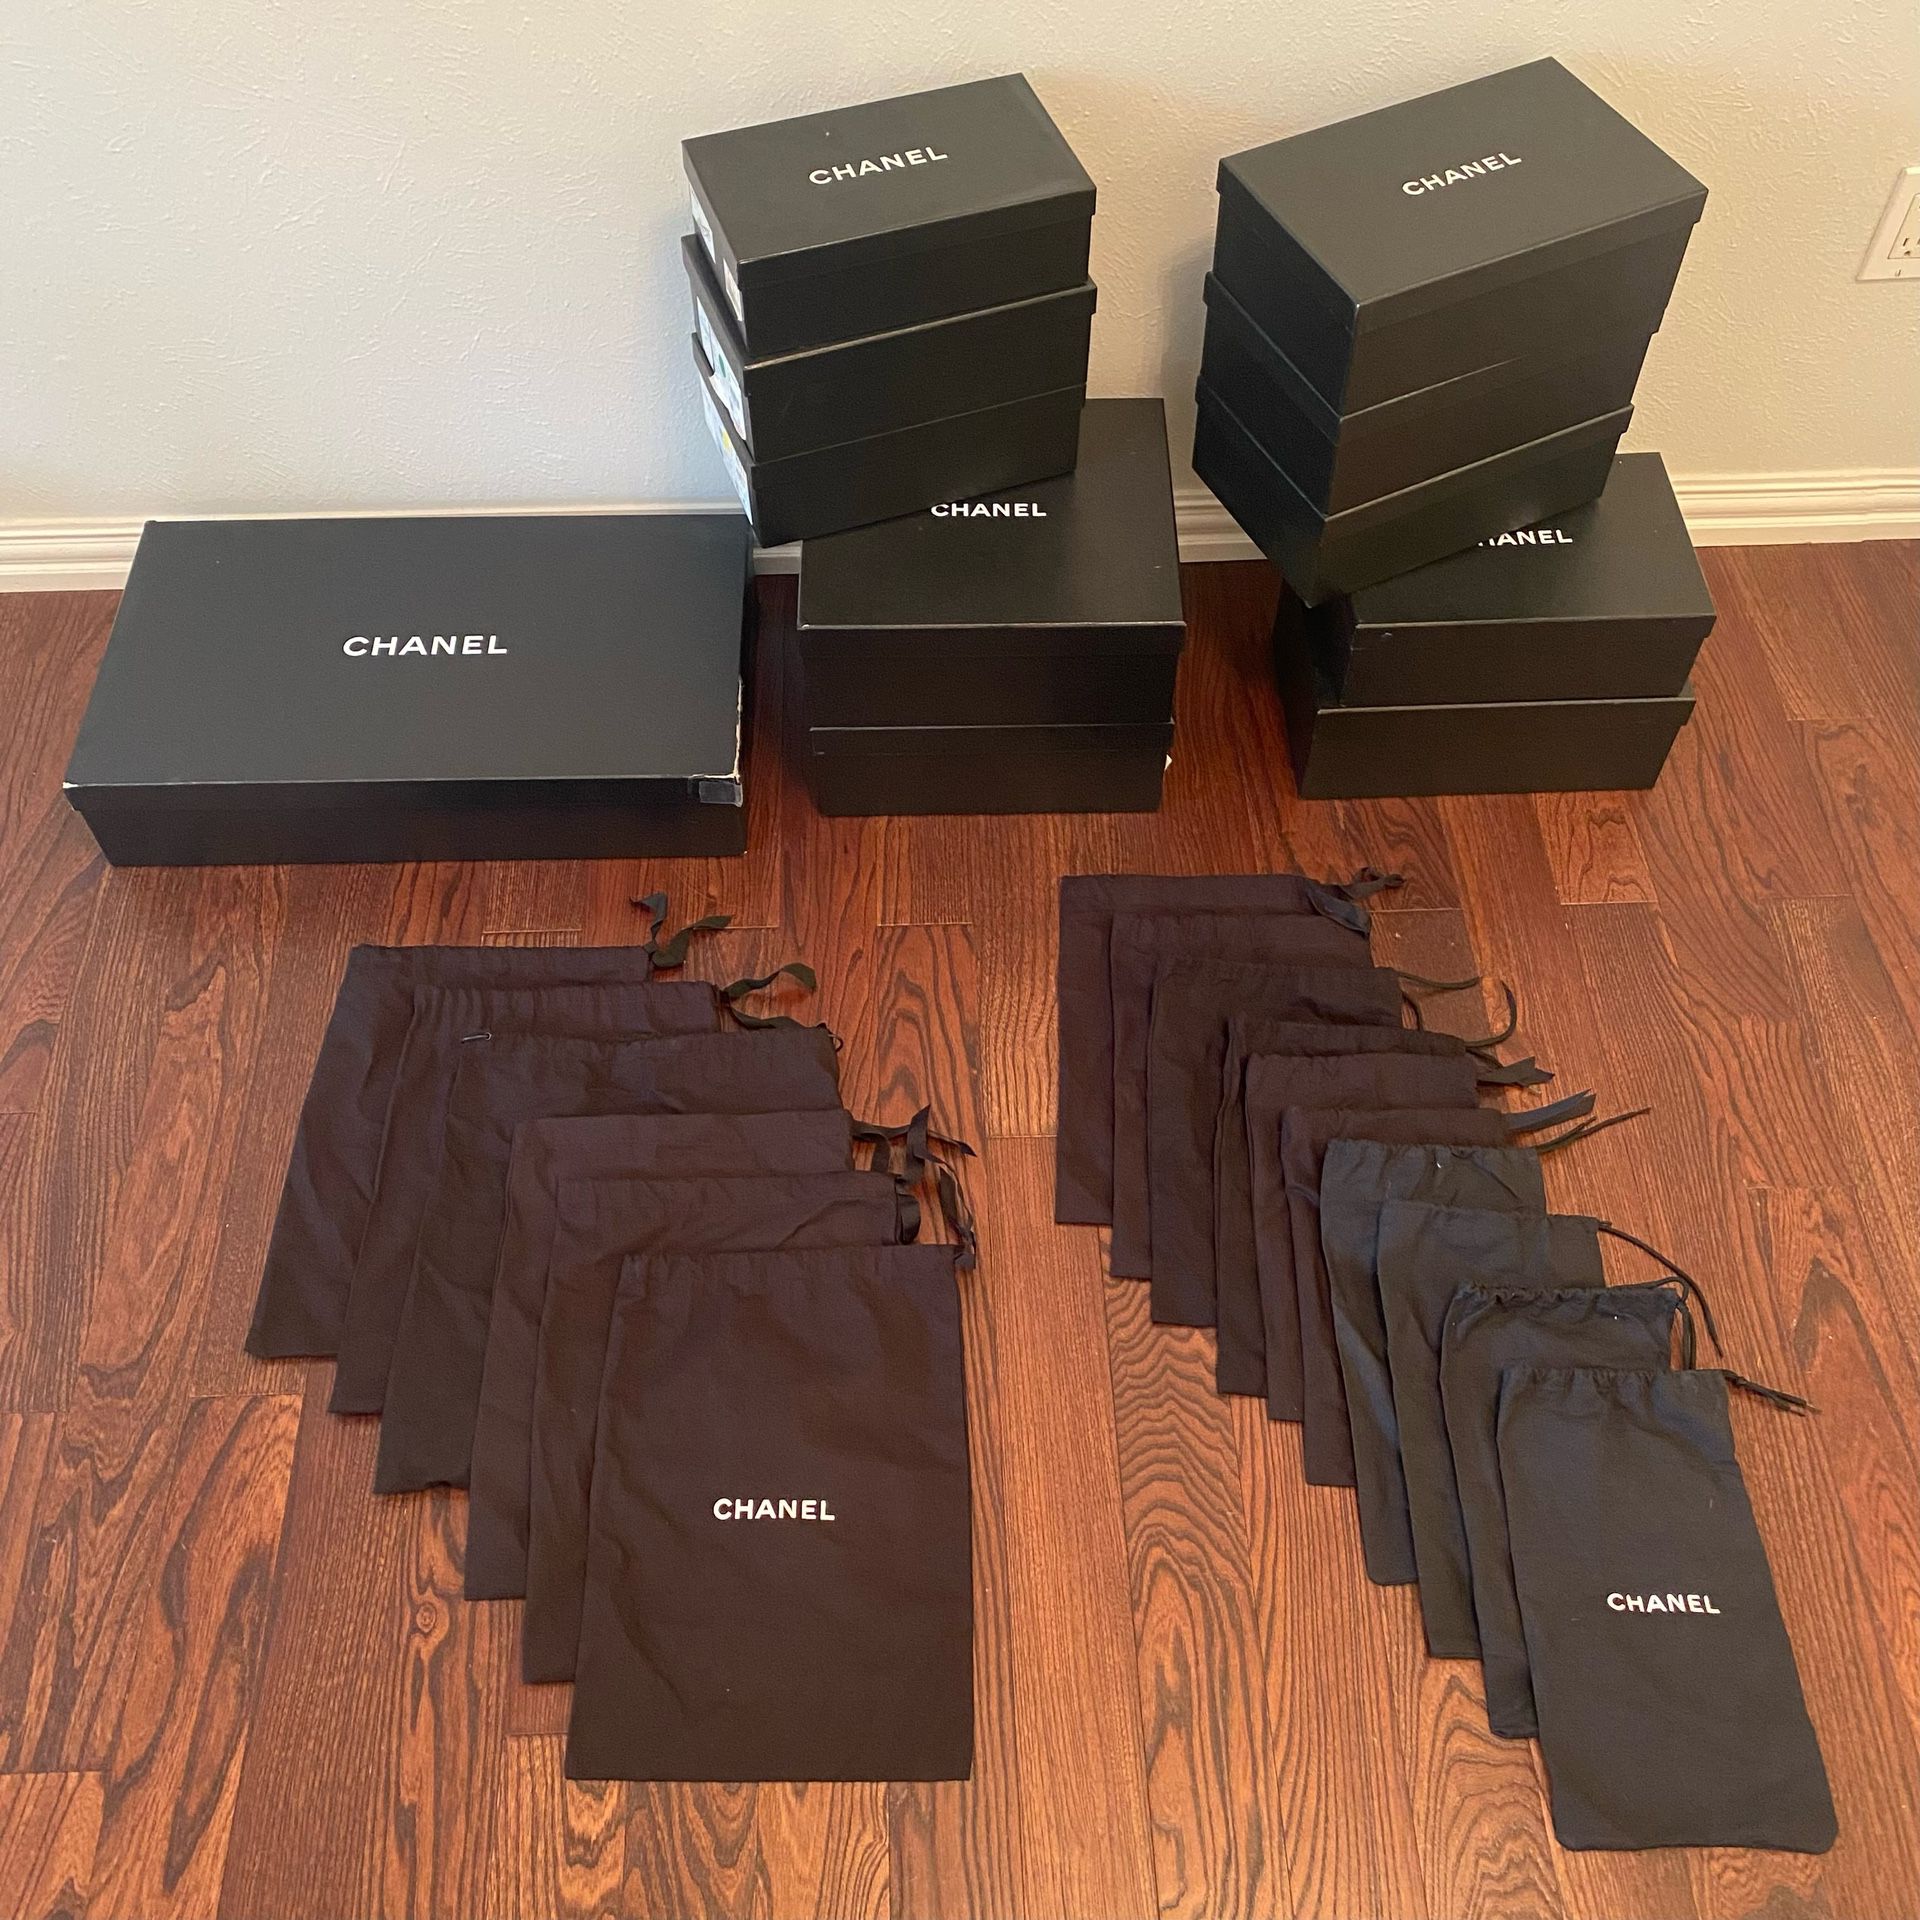 11 CHANEL shoe boxes of various sizes + 16 CHANEL shoe bags for